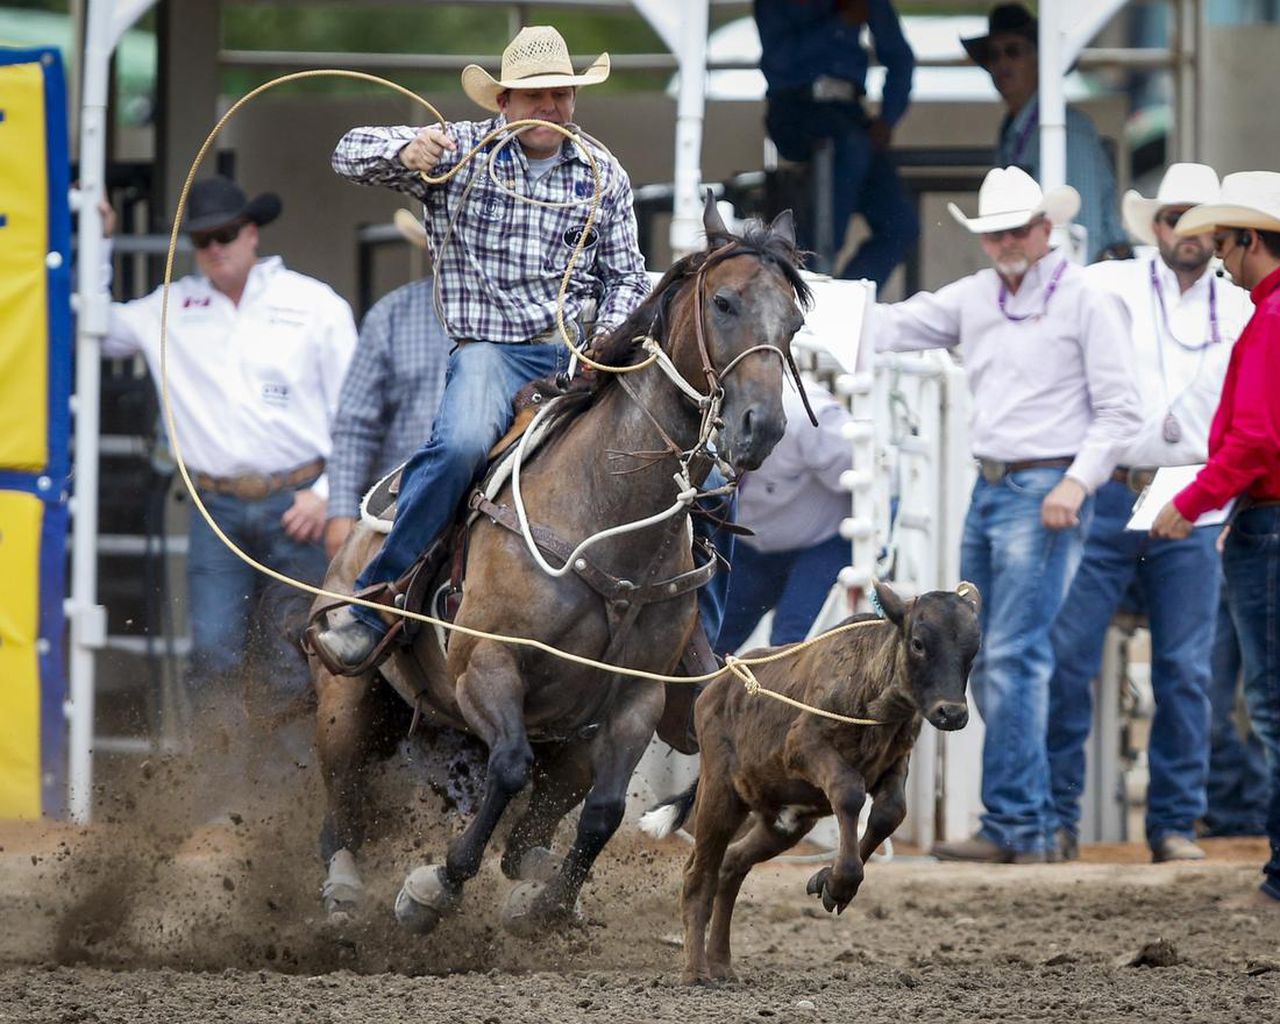 Caleb Smidt wins Calgary Stampede rodeo, beating out three former champions